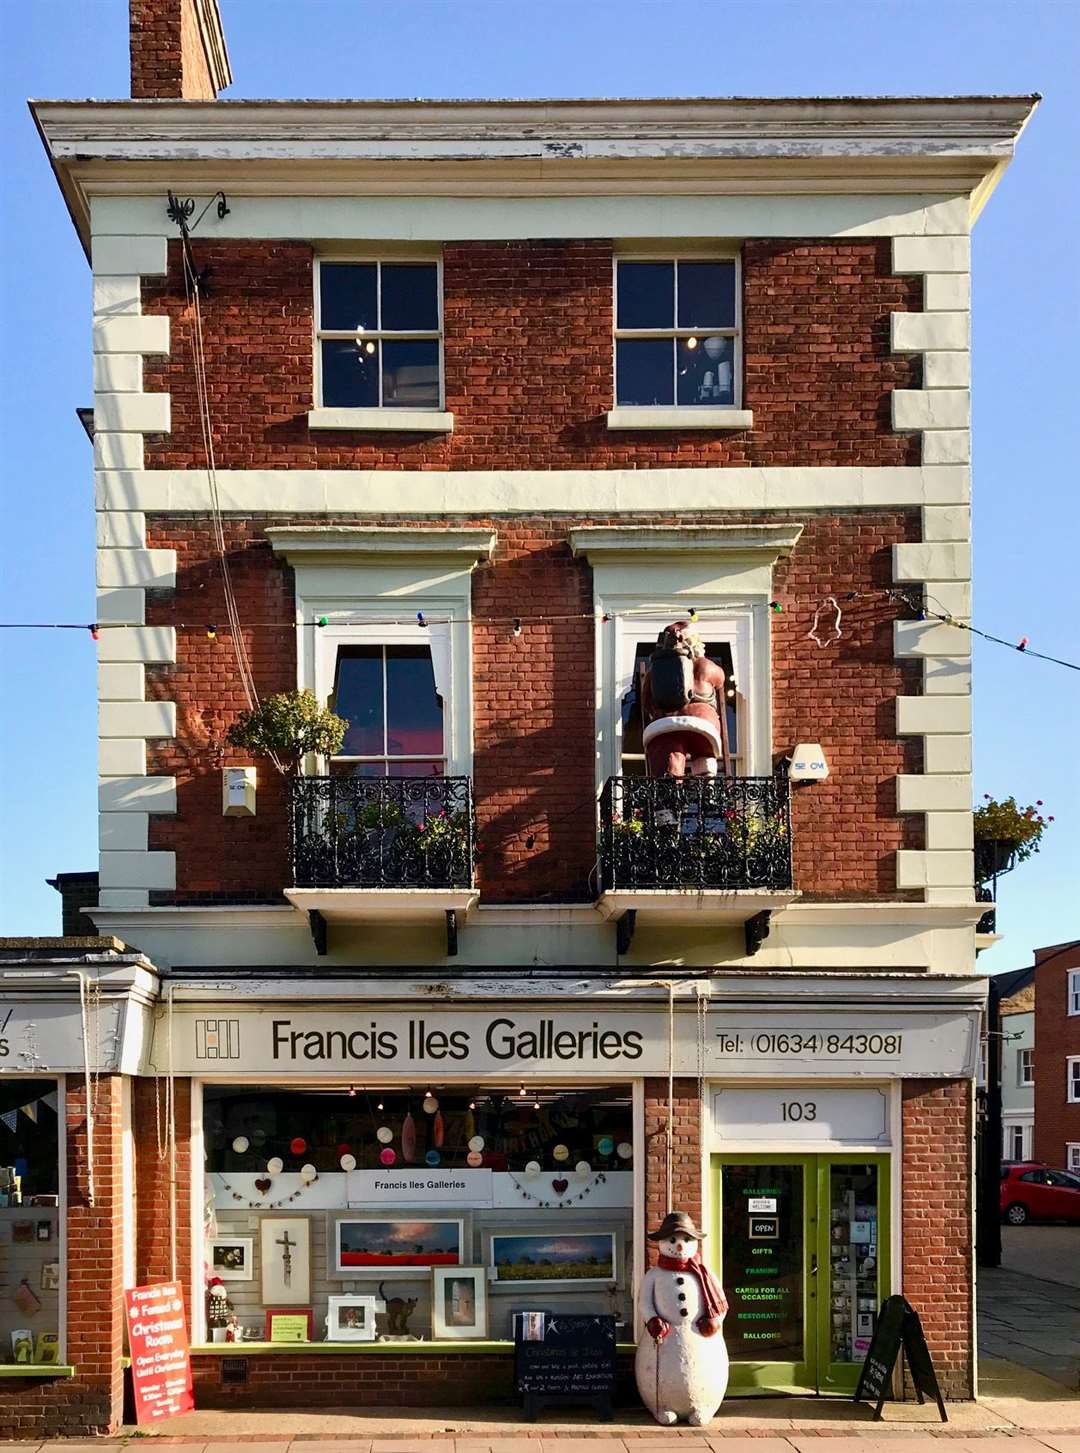 Francis Iles Galleries in Rochester High Street